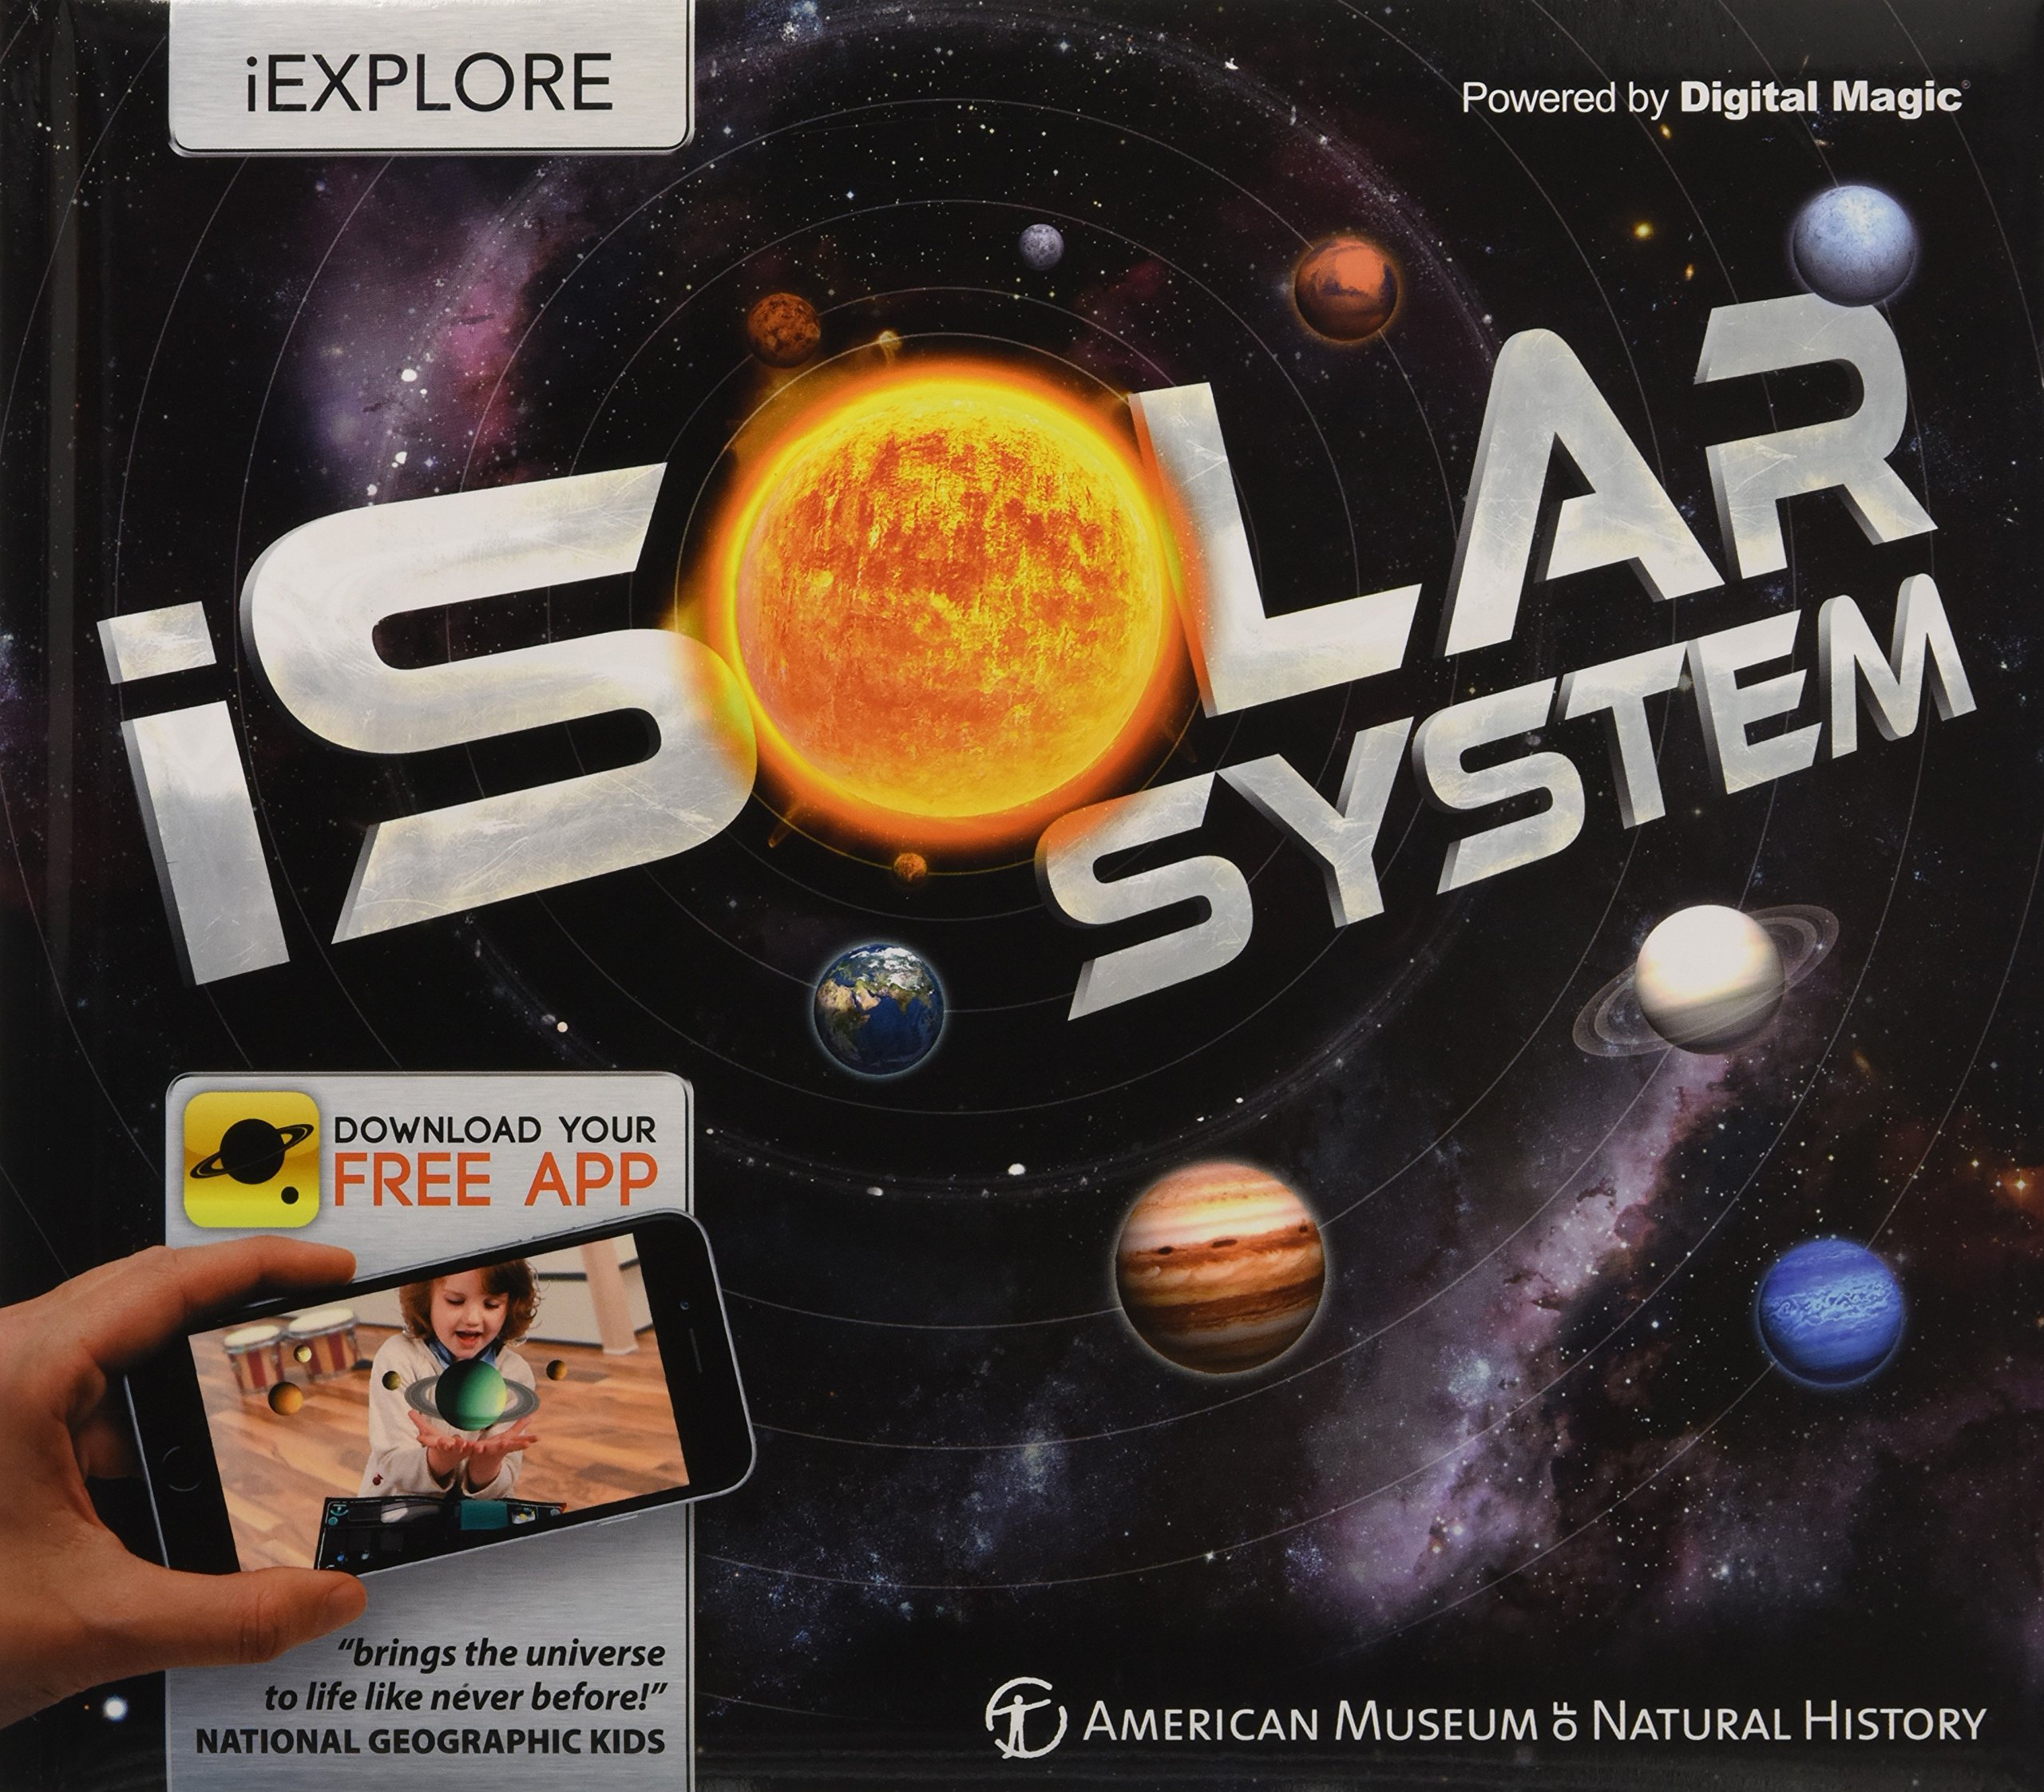 iSolar System - An Augmented Reality Book